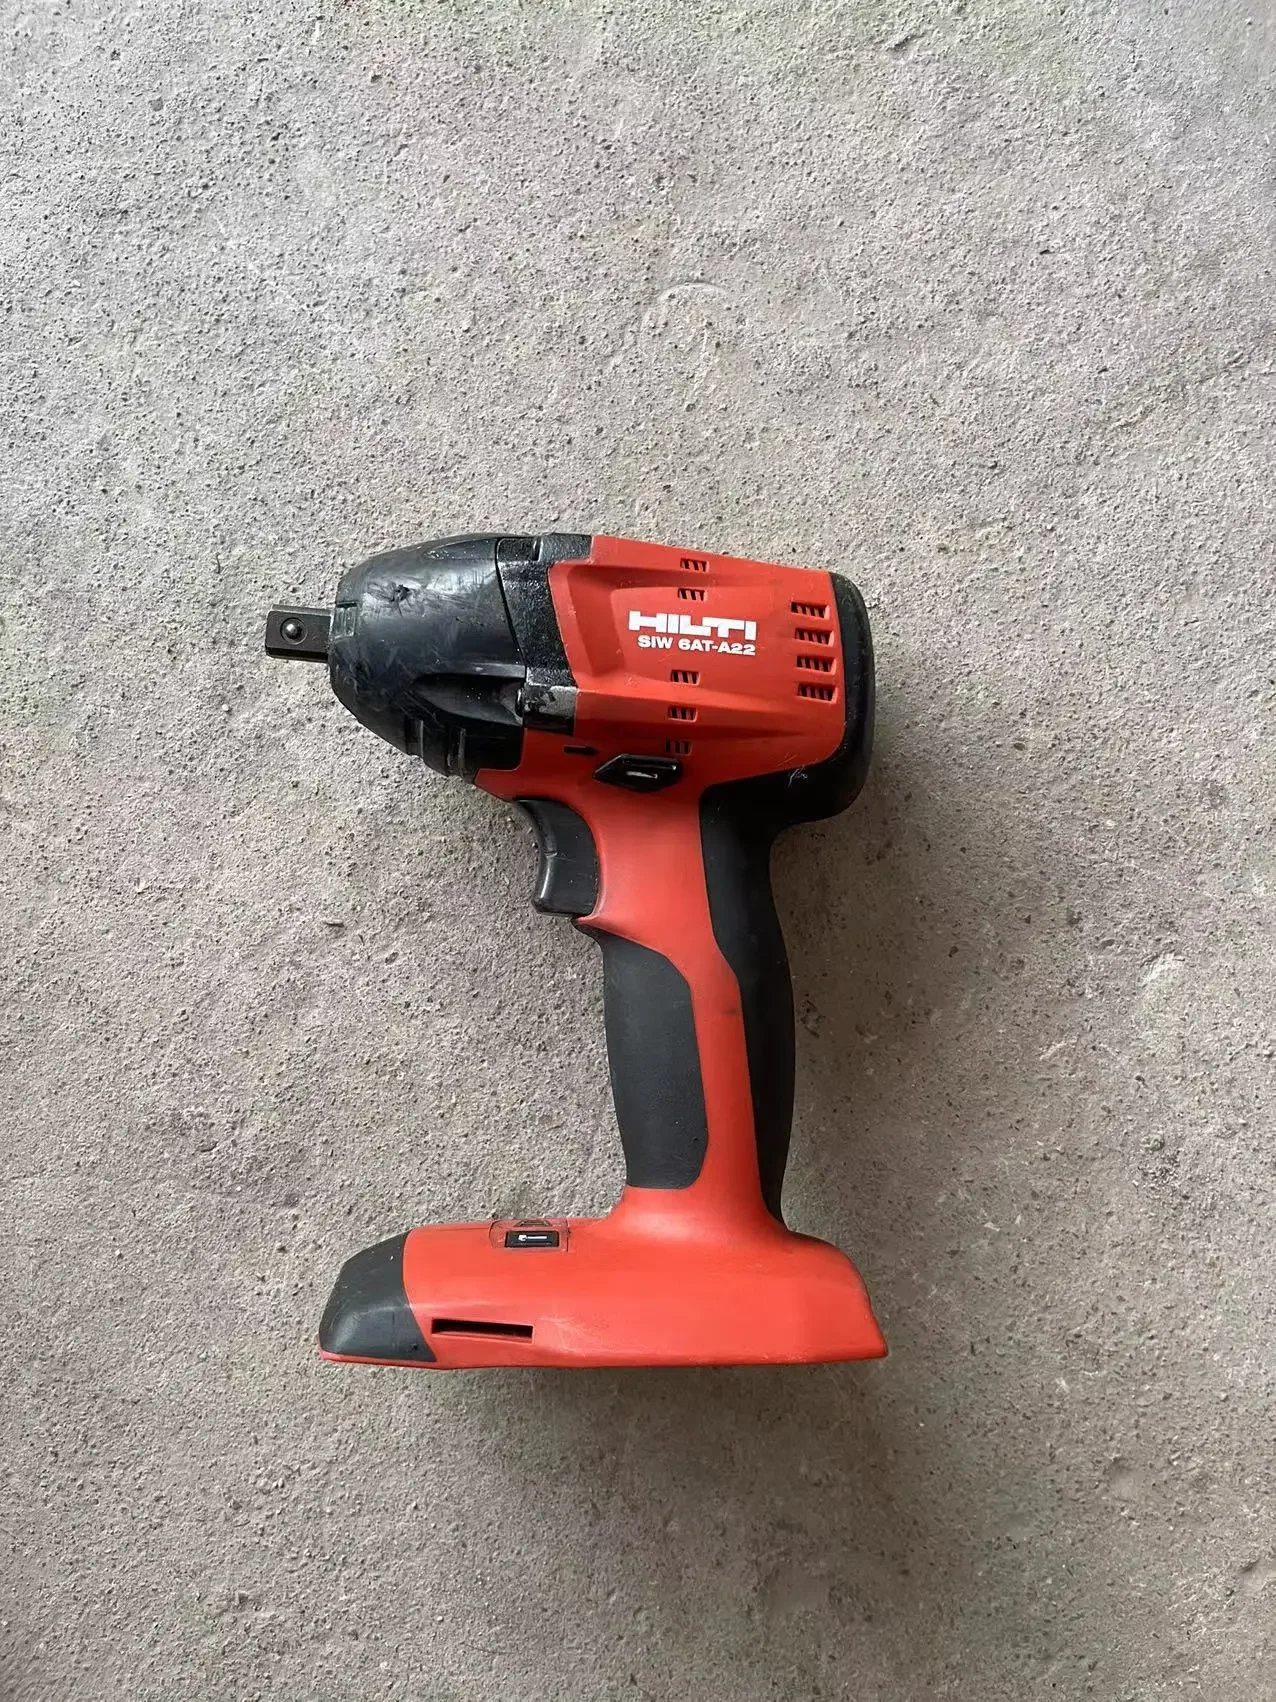 

Hilti SIW 6AT-A22 Cordless Brushless 1/2" 95 kN Bare Tool,SECOND HAND